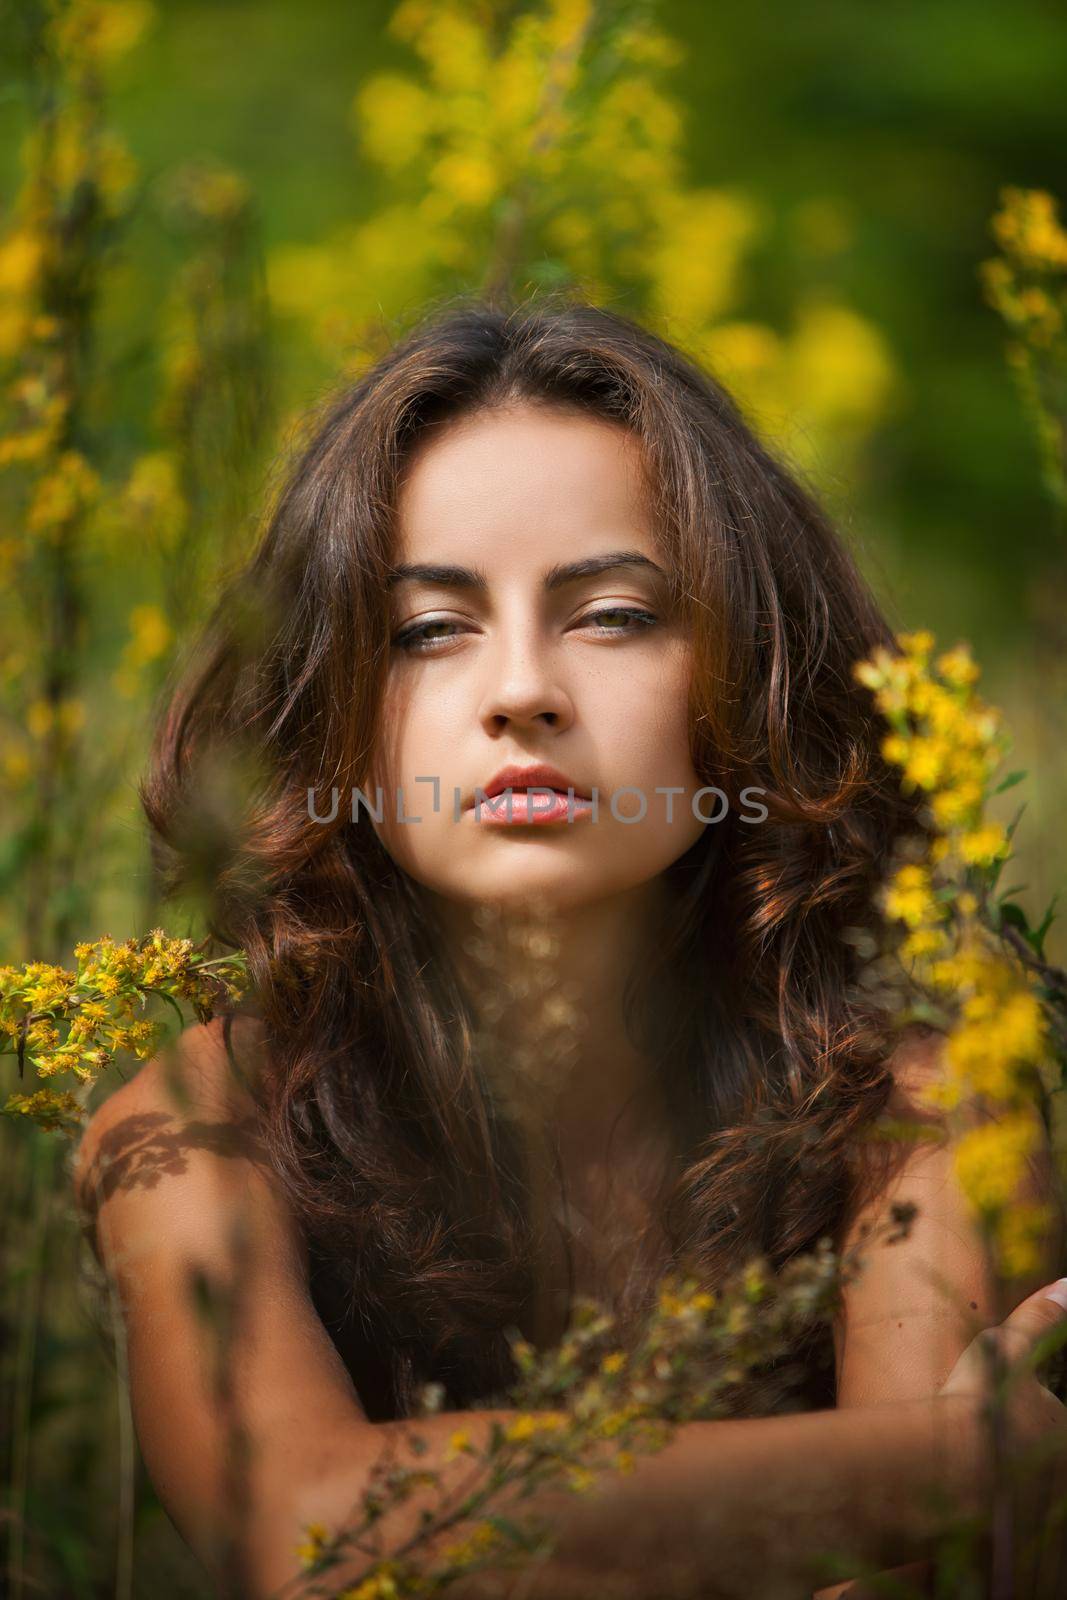 Portrait of a young woman on flowers field blured background